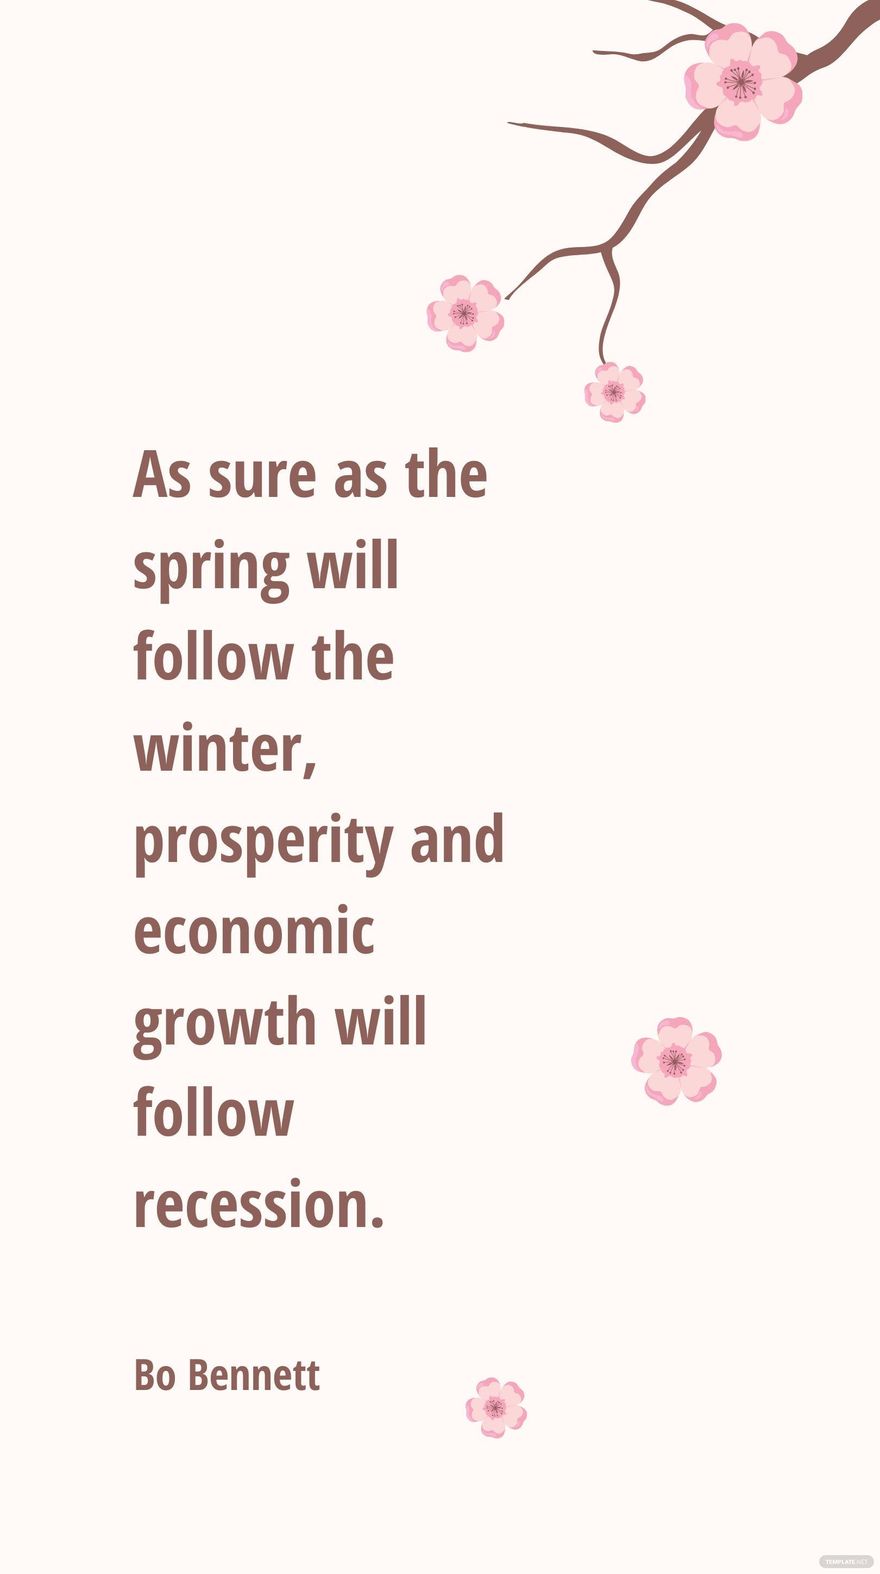  Bo Bennett - As sure as the spring will follow the winter, prosperity and economic growth will follow recession.